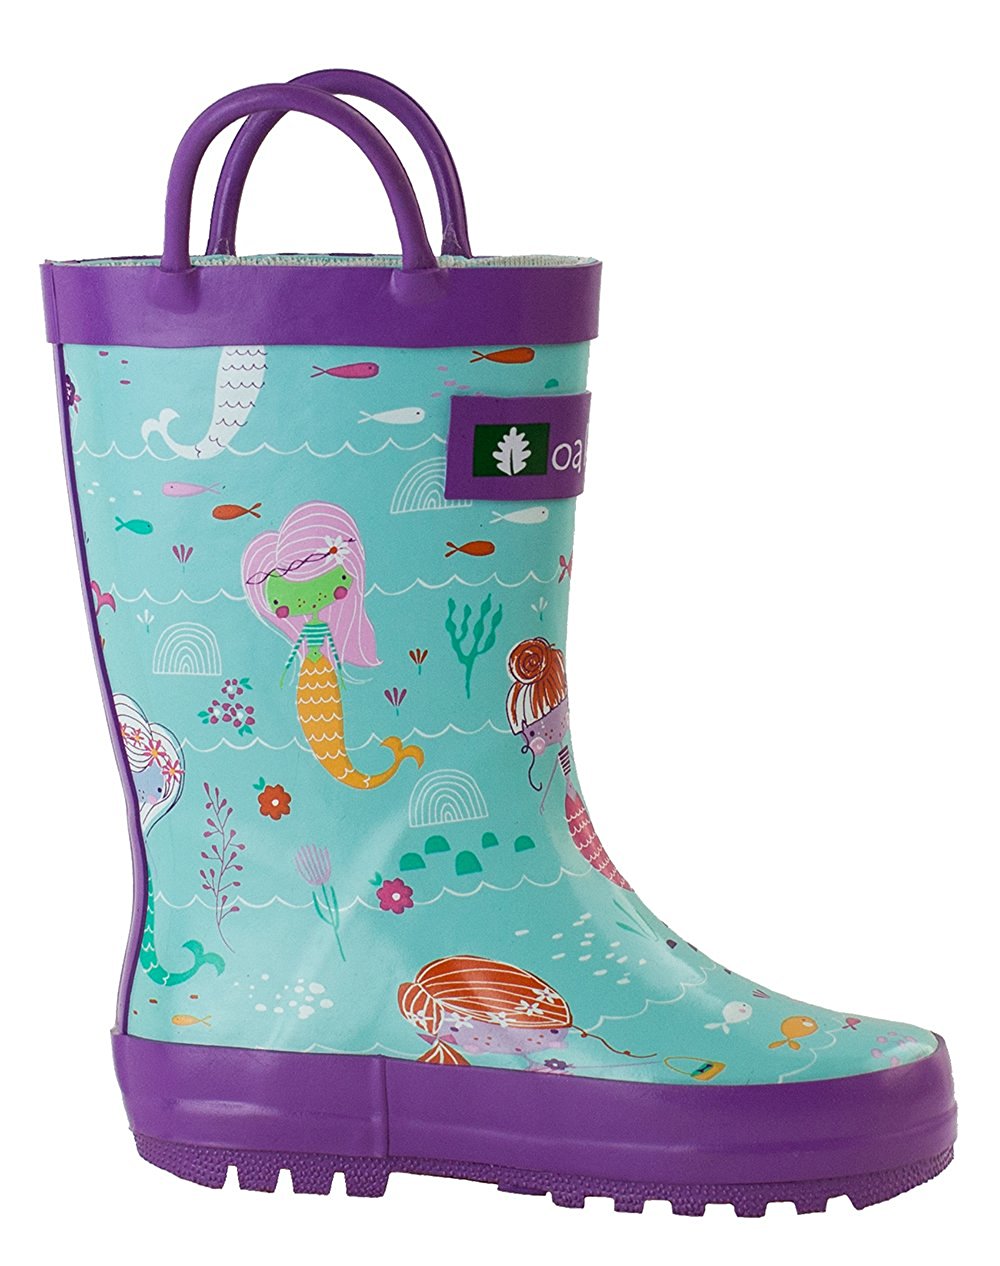 Spring rain boots for toddlers under $30: Mermaids by Oakiwear